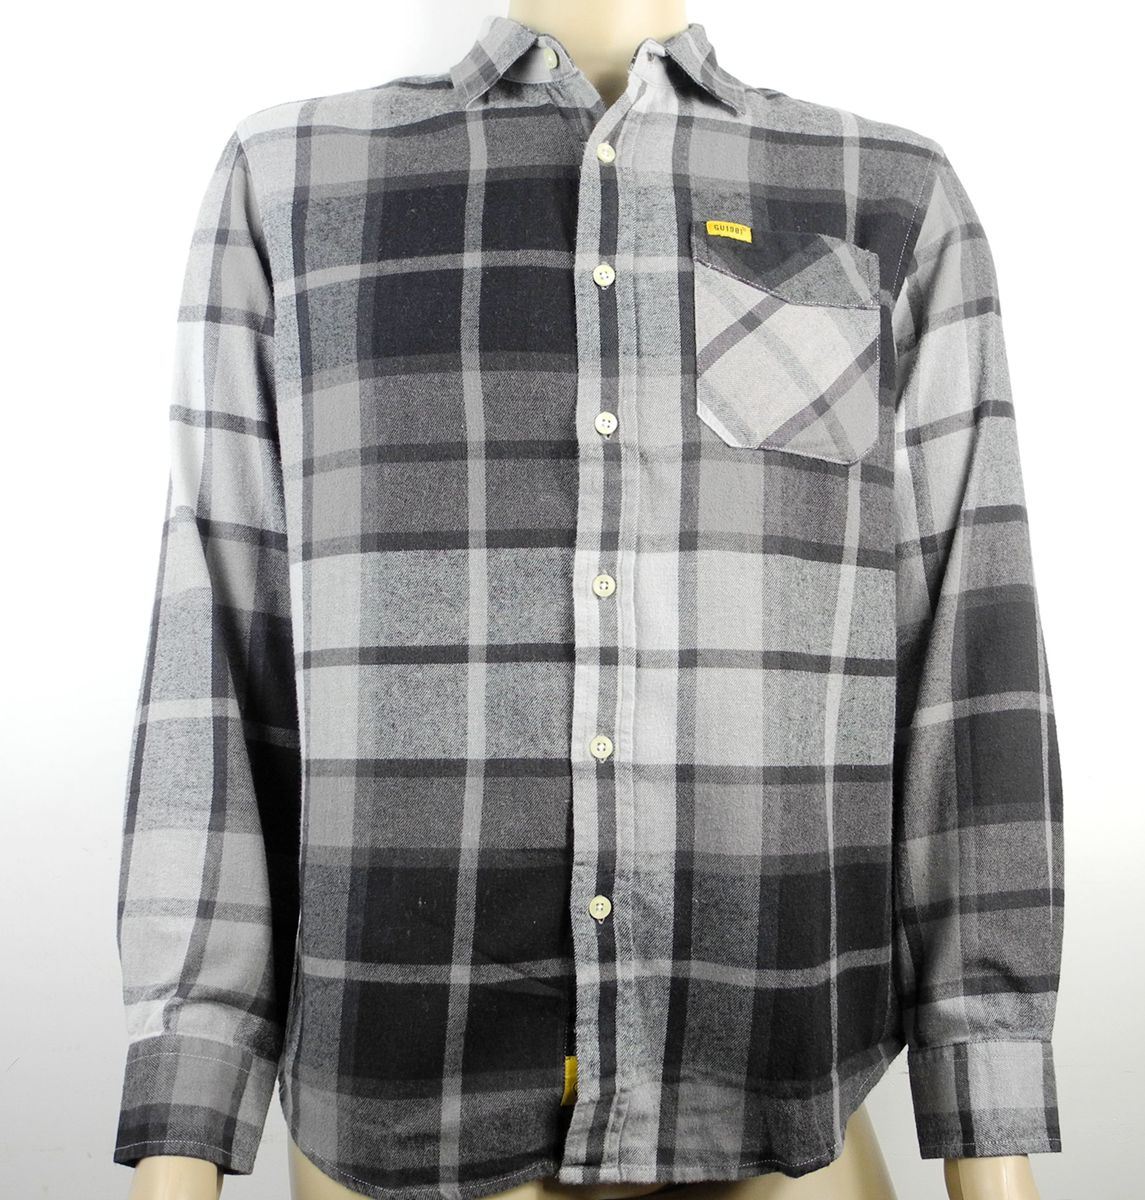 Inventory on Hand Stock Casual Shirt with Low MOQ